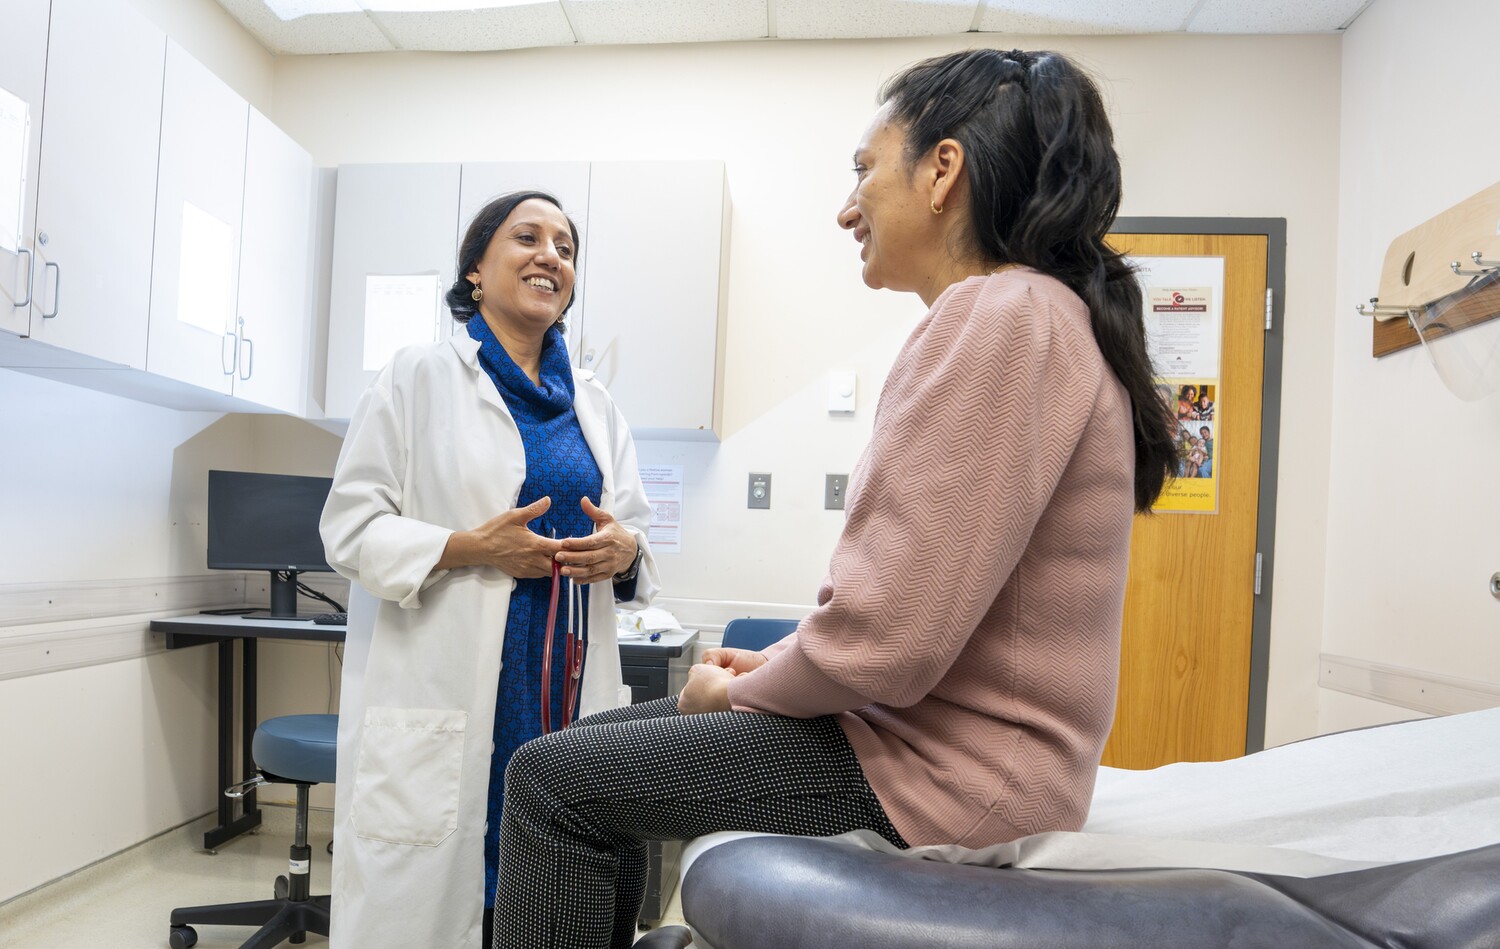 CUHCC physician and CEO Roli Dwivedi, MD, has a friendly chat with patient and CUHCC board of directors member Ines Lazo in a clinical exam room